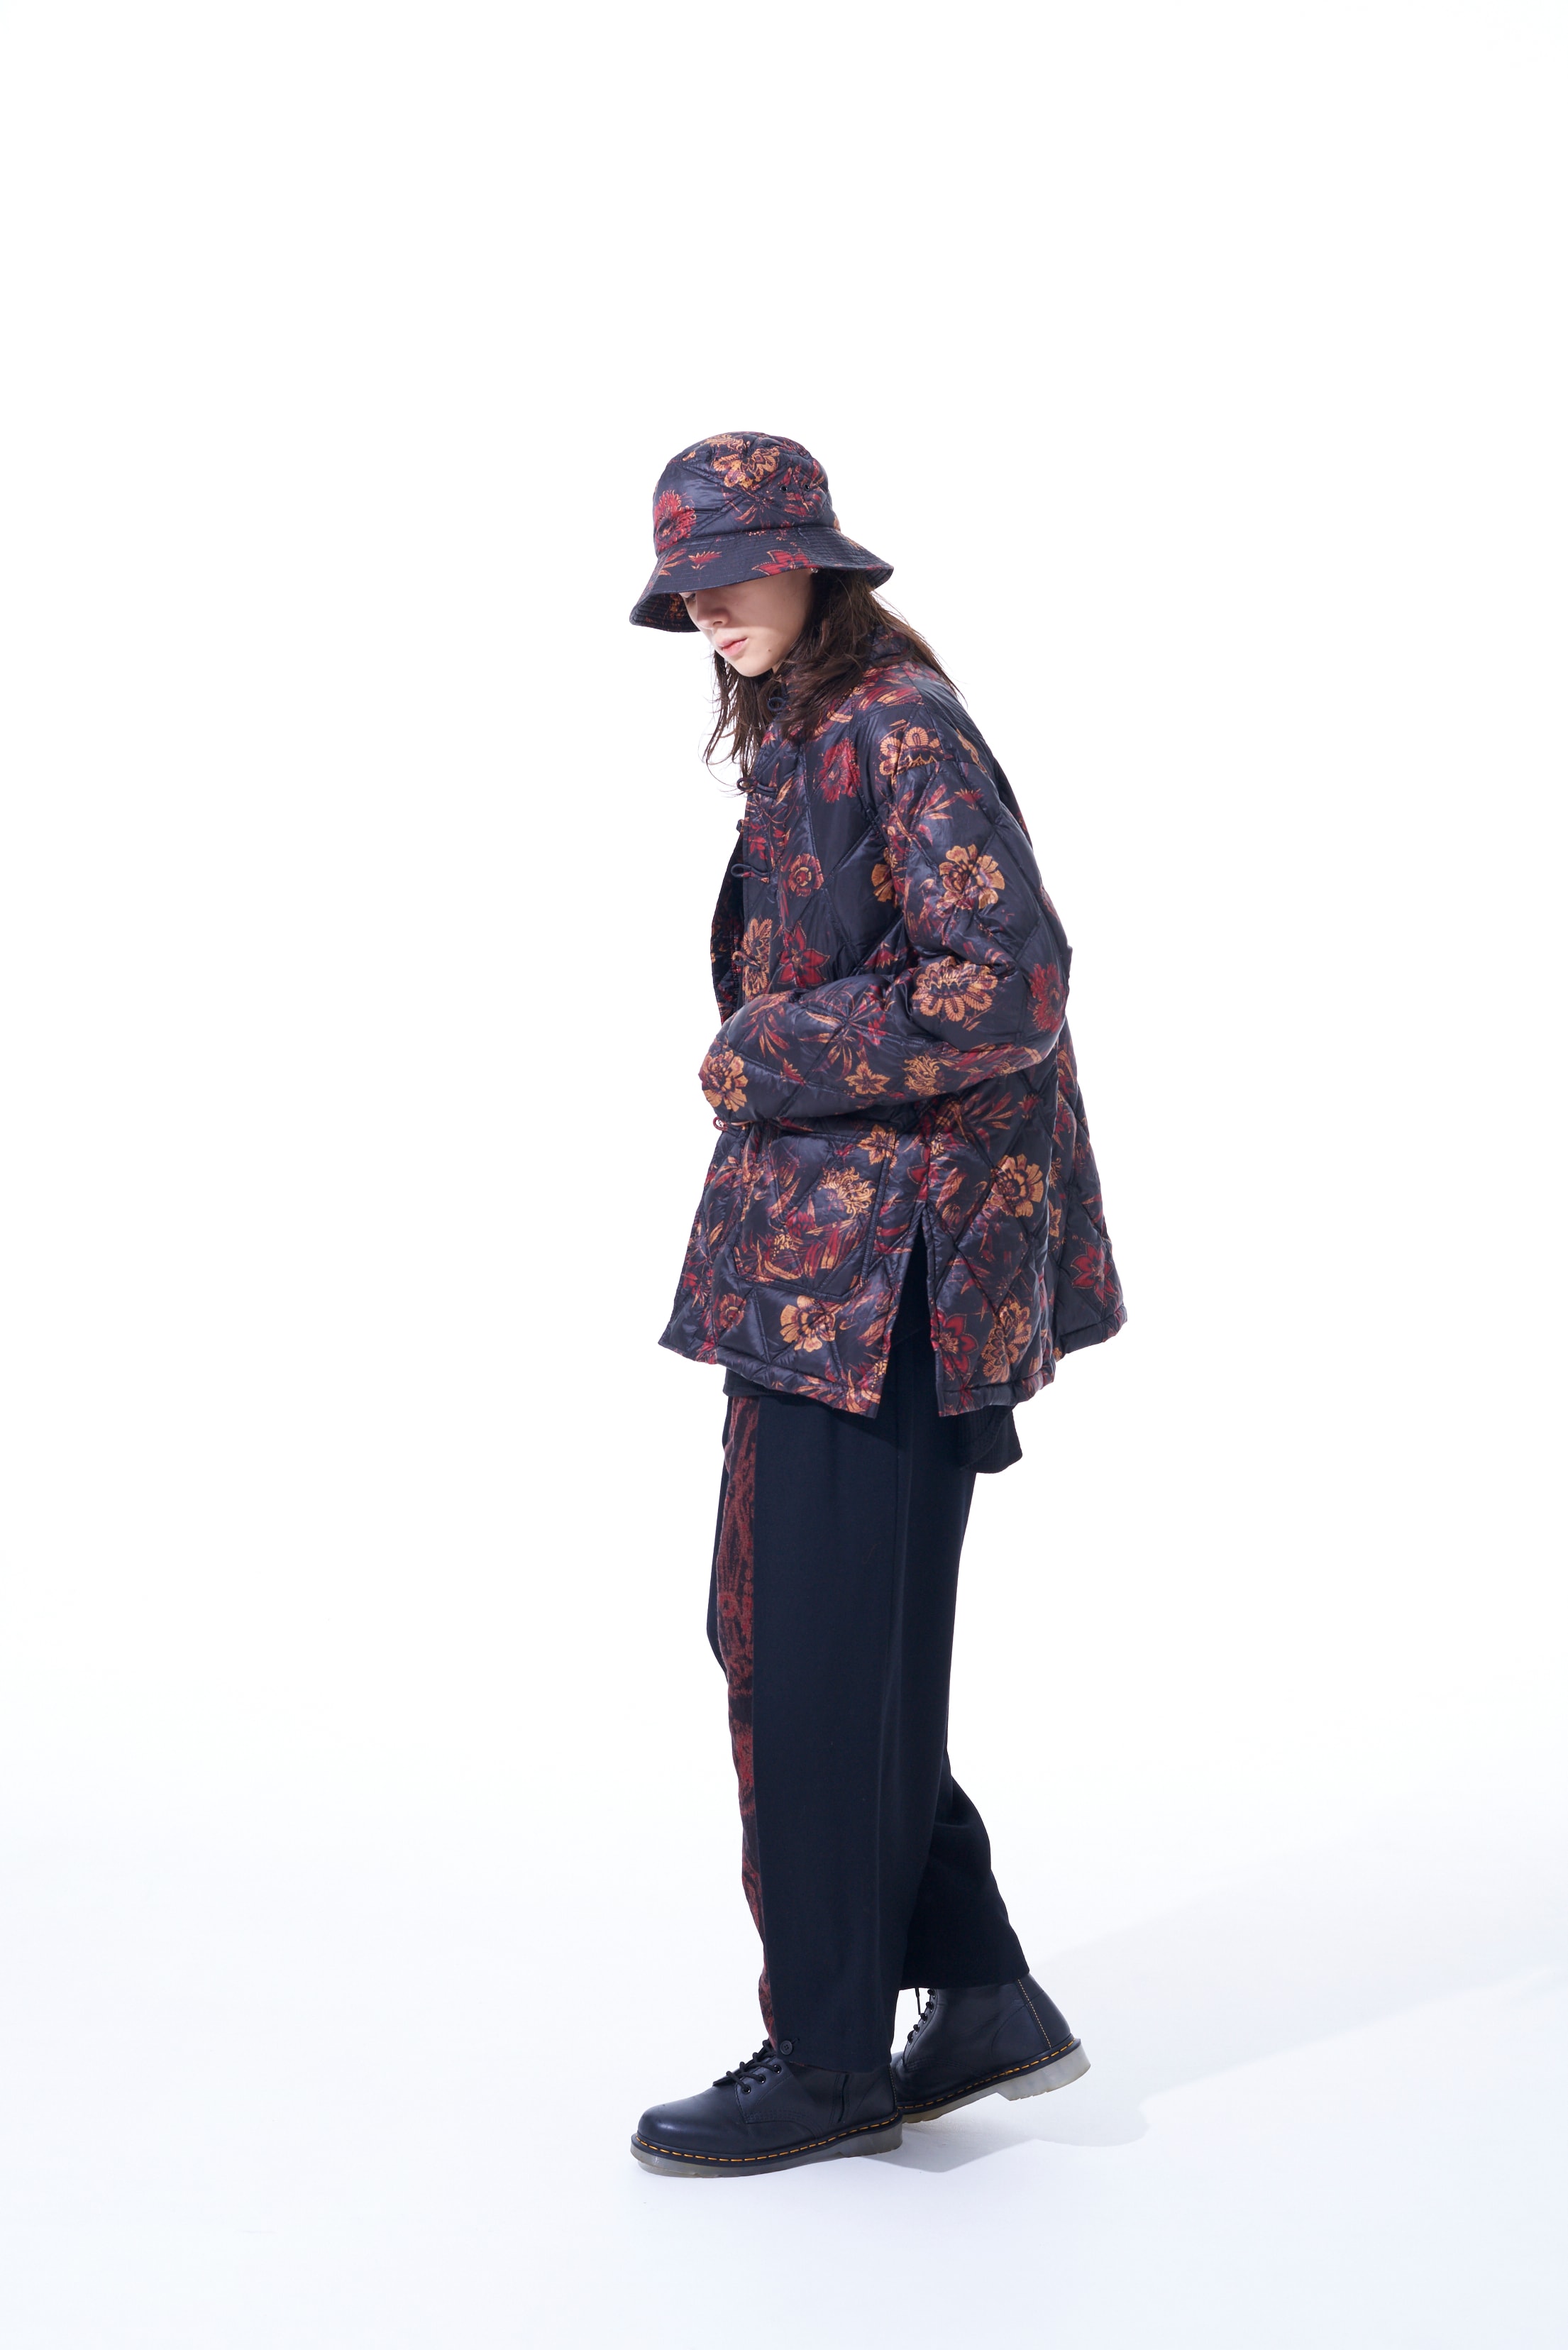 【S'YTE x TAION】Collaboration Collection FLORAL PATTERN QUILTED DOWN CHINA JACKET